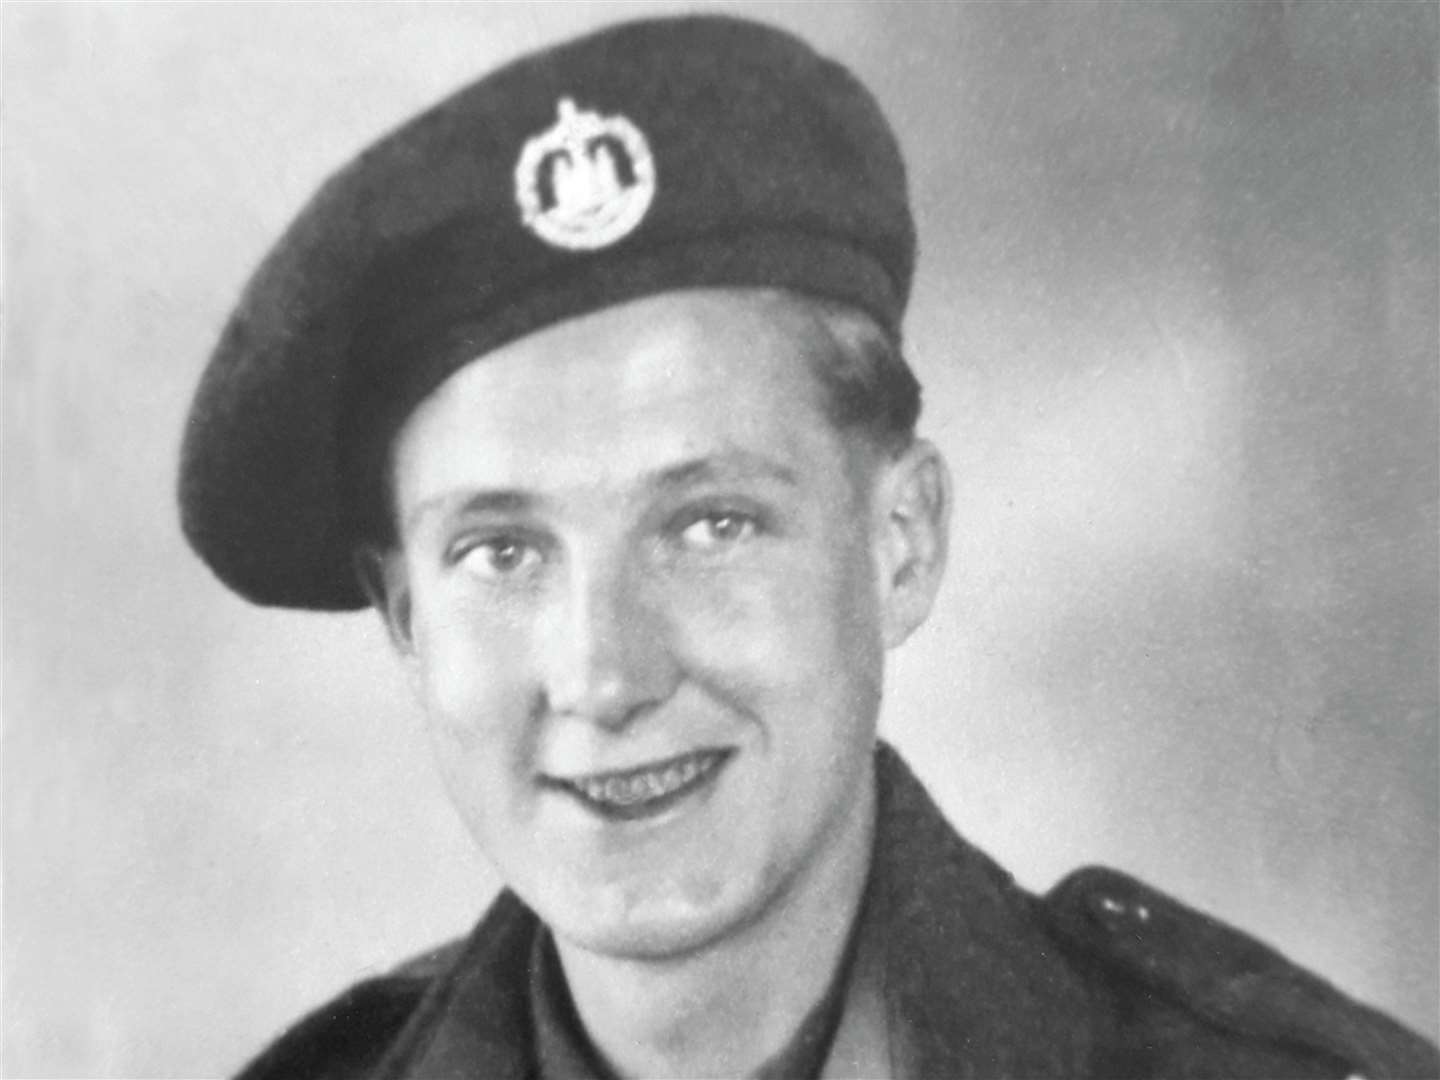 Roy Smith served with the 4th Battalion and went over to France on a landing craft shortly after D-Day